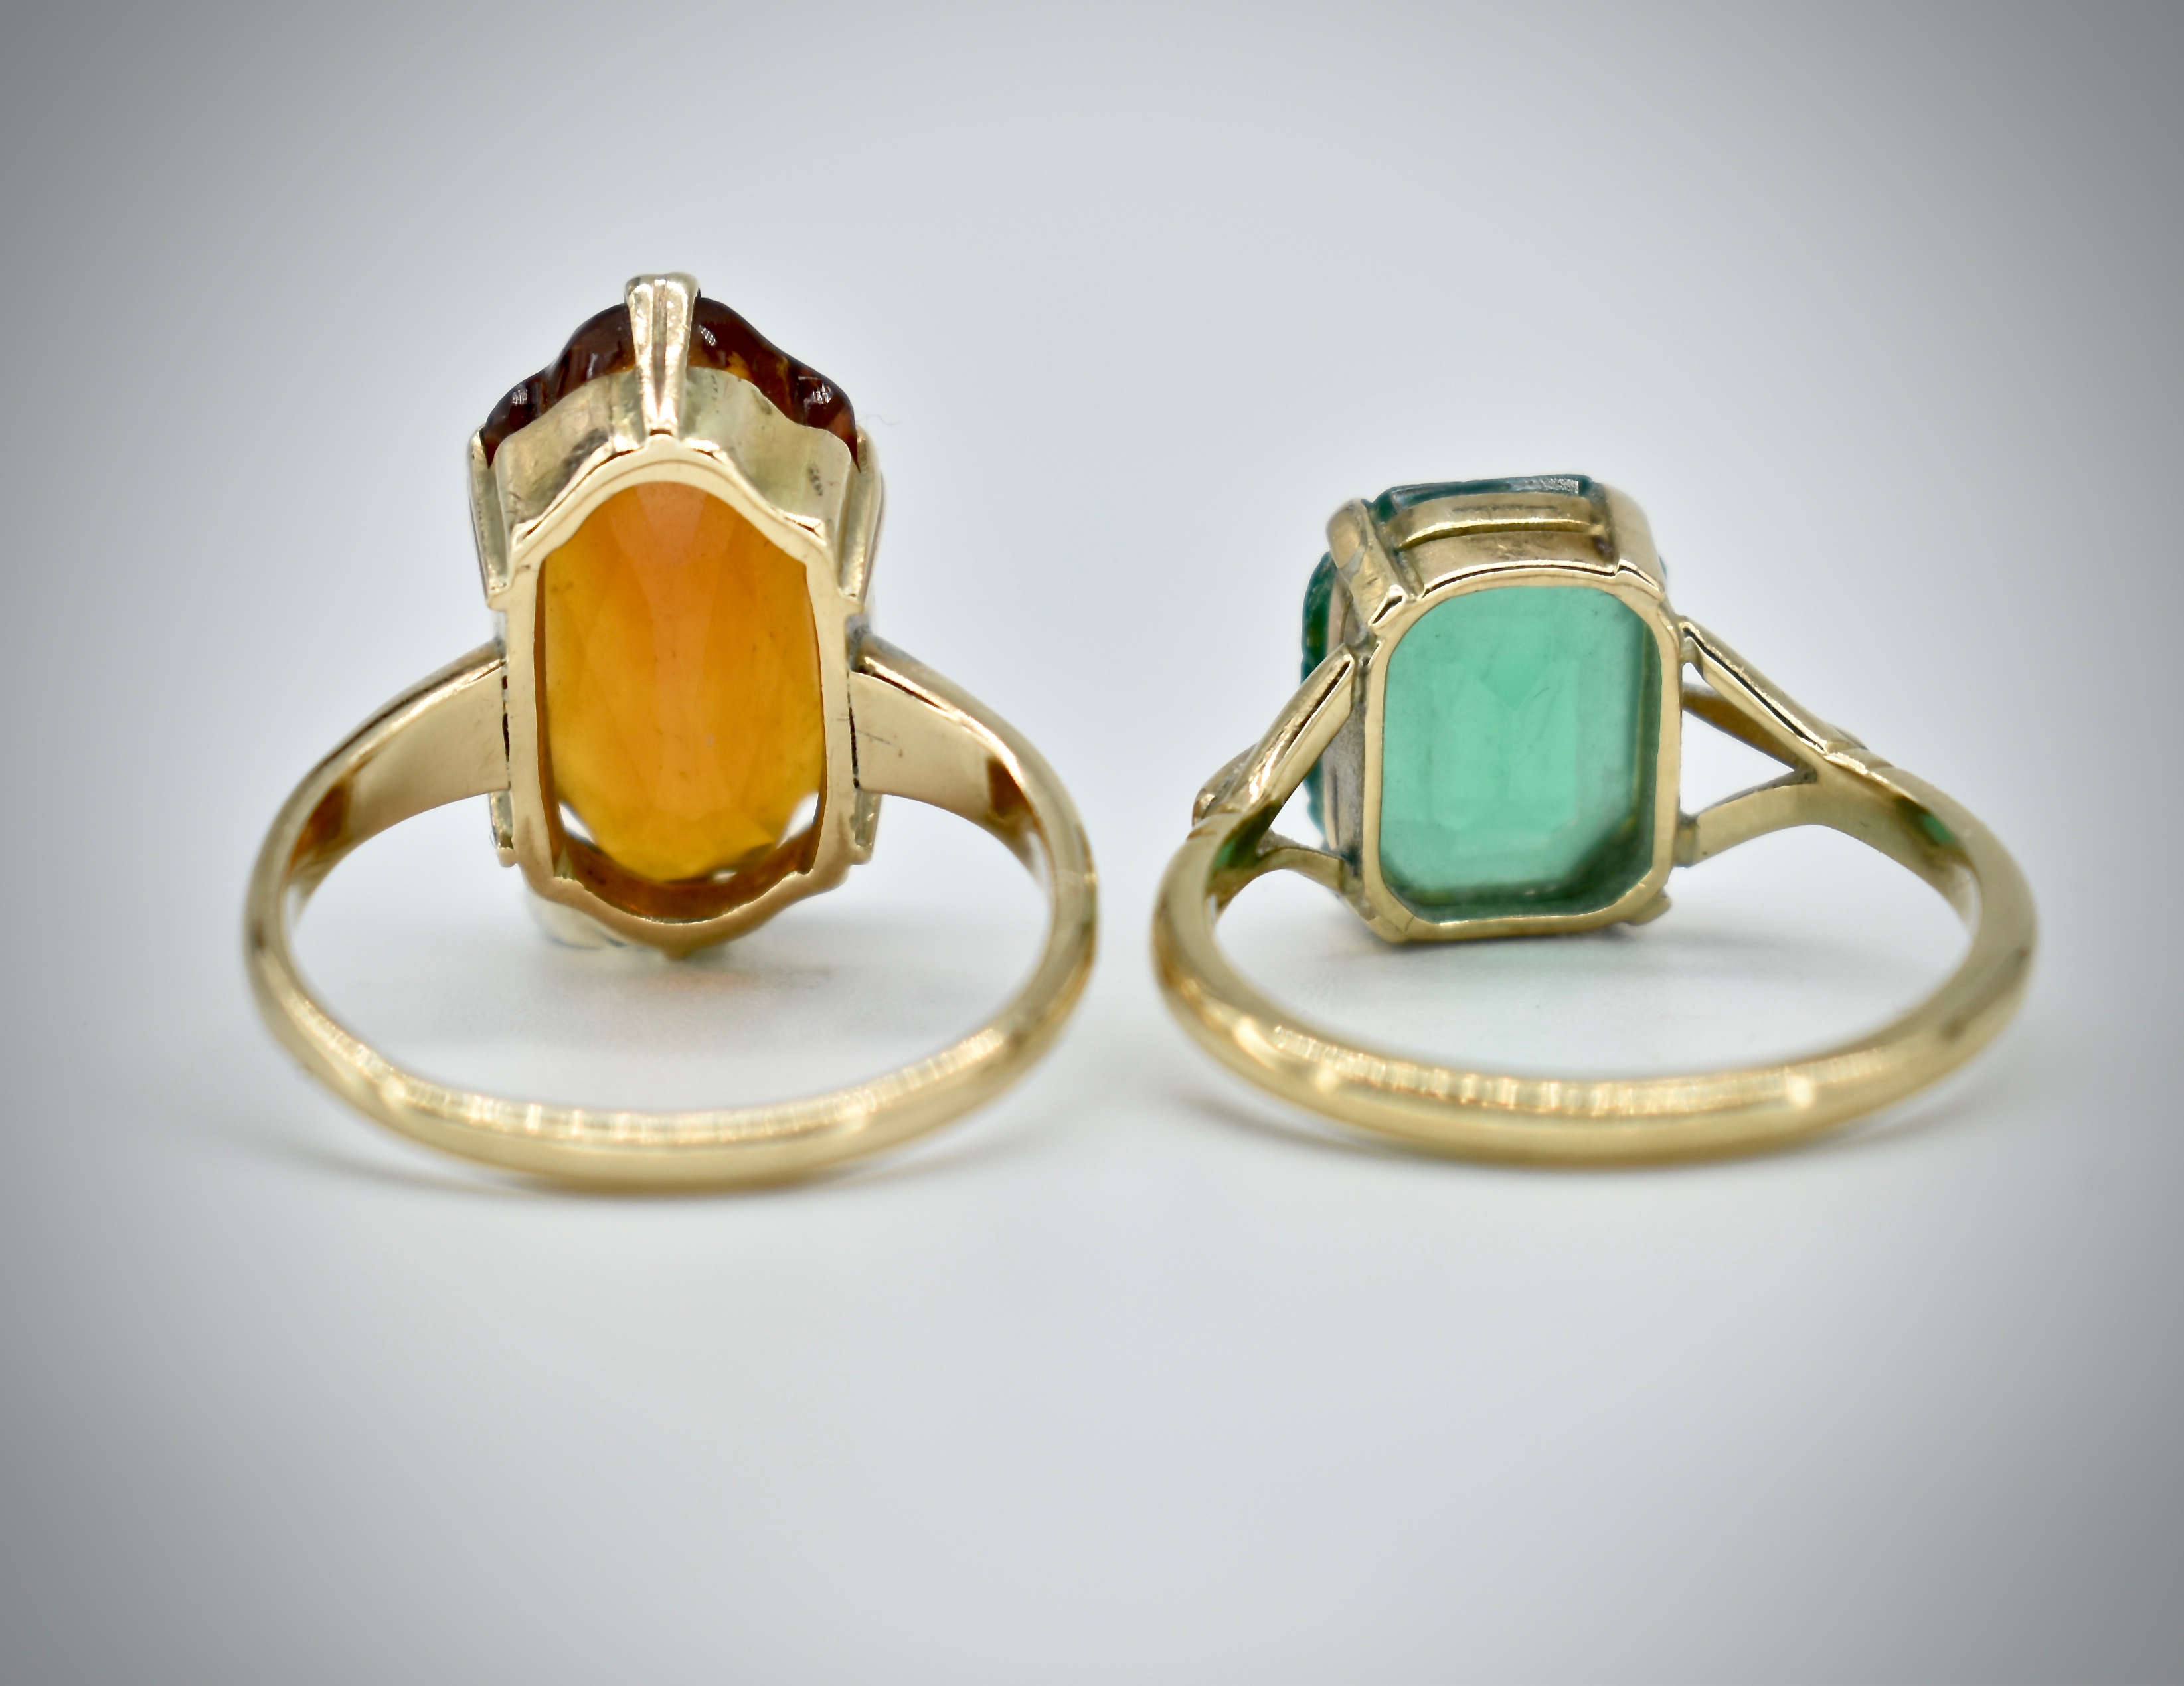 9ct Gold & Citrine Dress Ring with 9ct Gold Paste Set Ring - Image 2 of 2